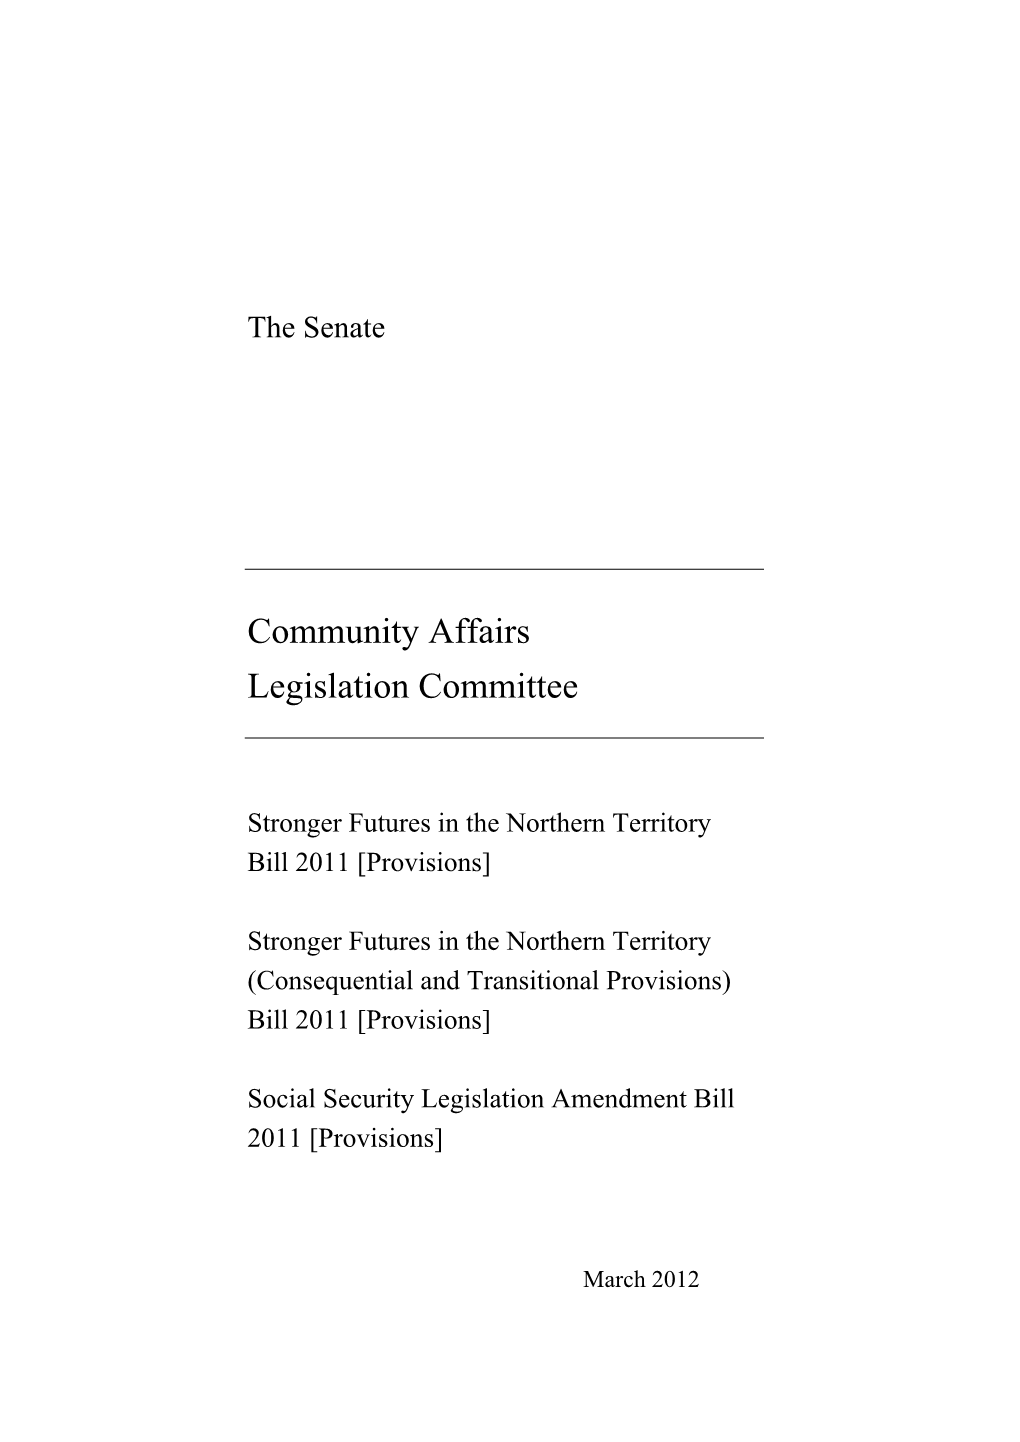 Report: Stronger Futures in the Northern Territory Bill 2011 and Two